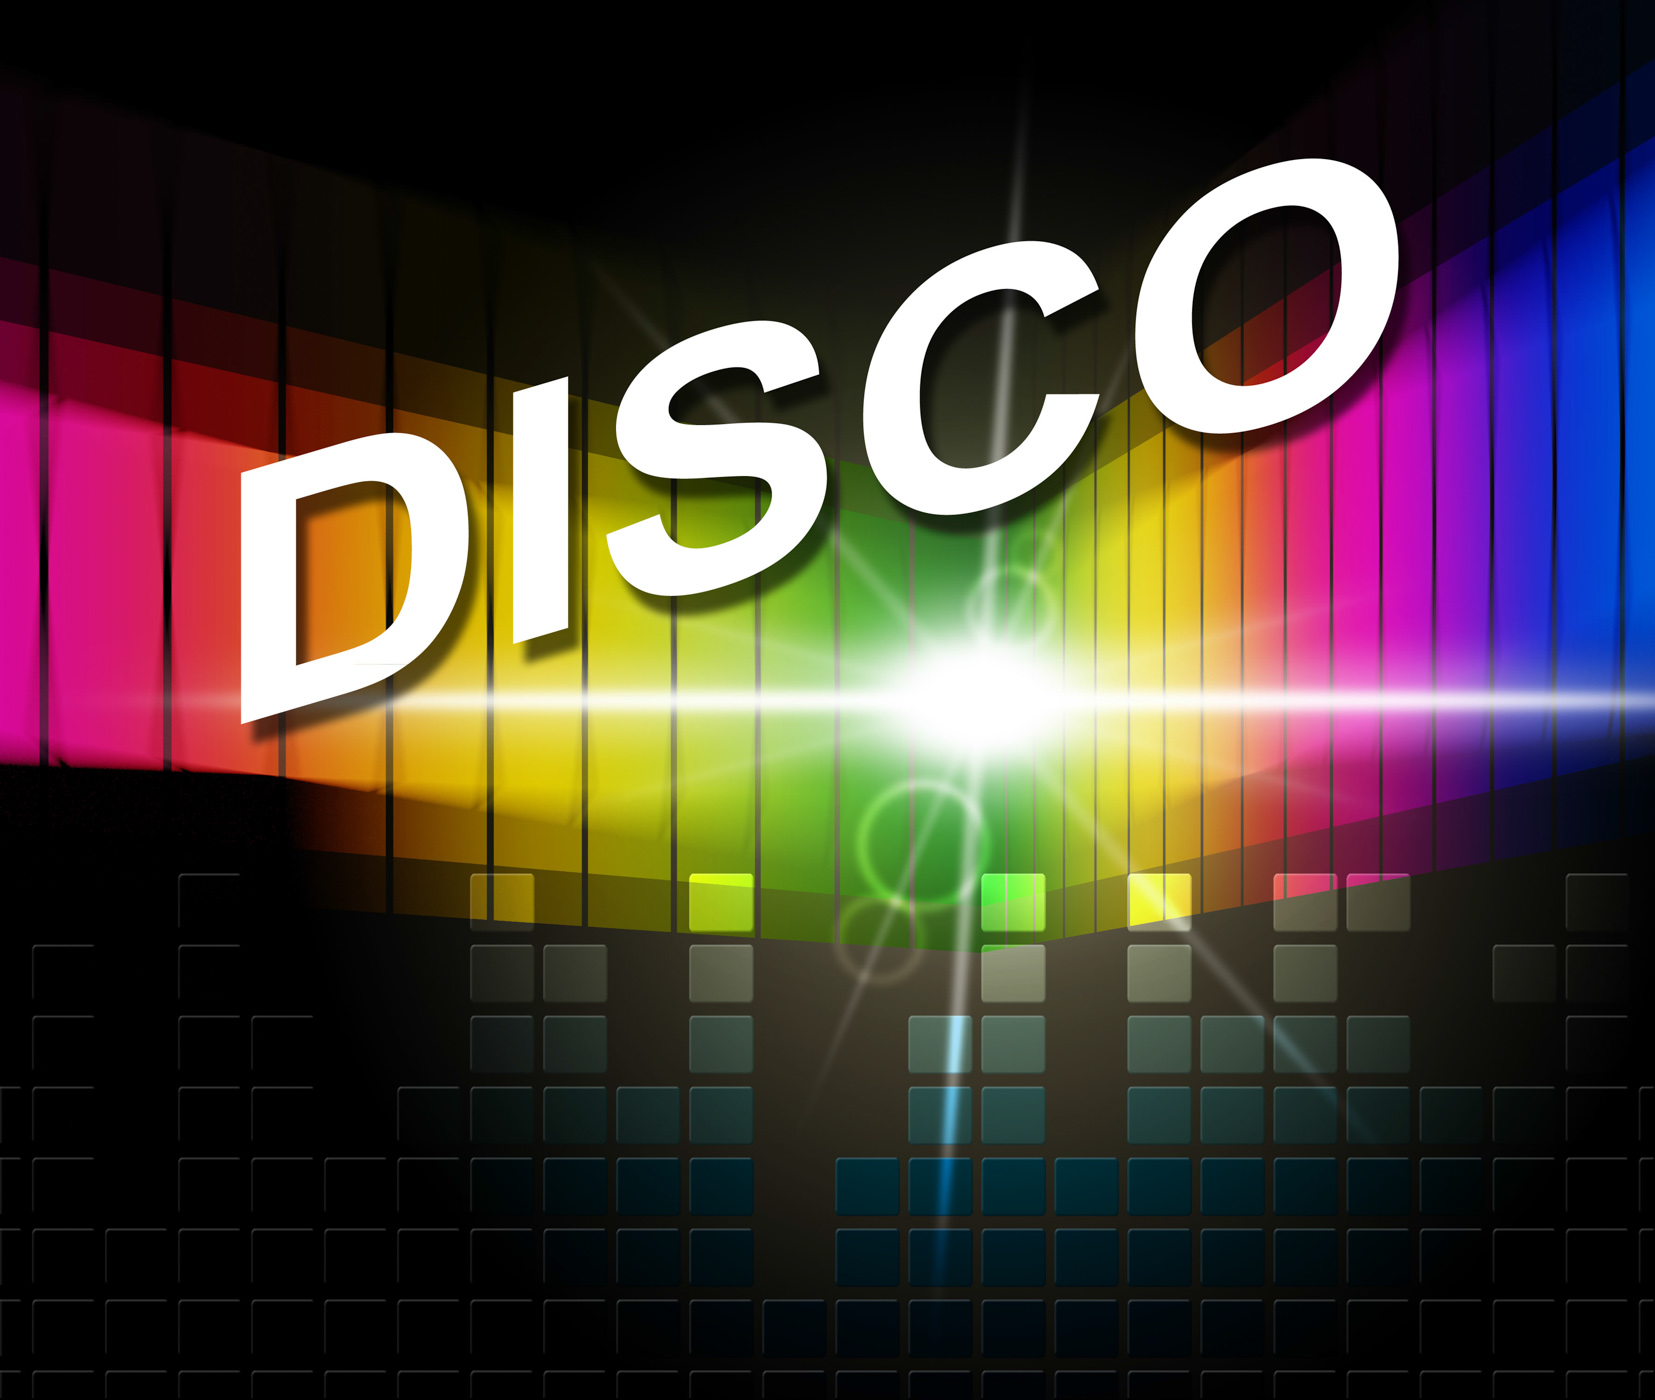 Disco music represents sound track and acoustic photo